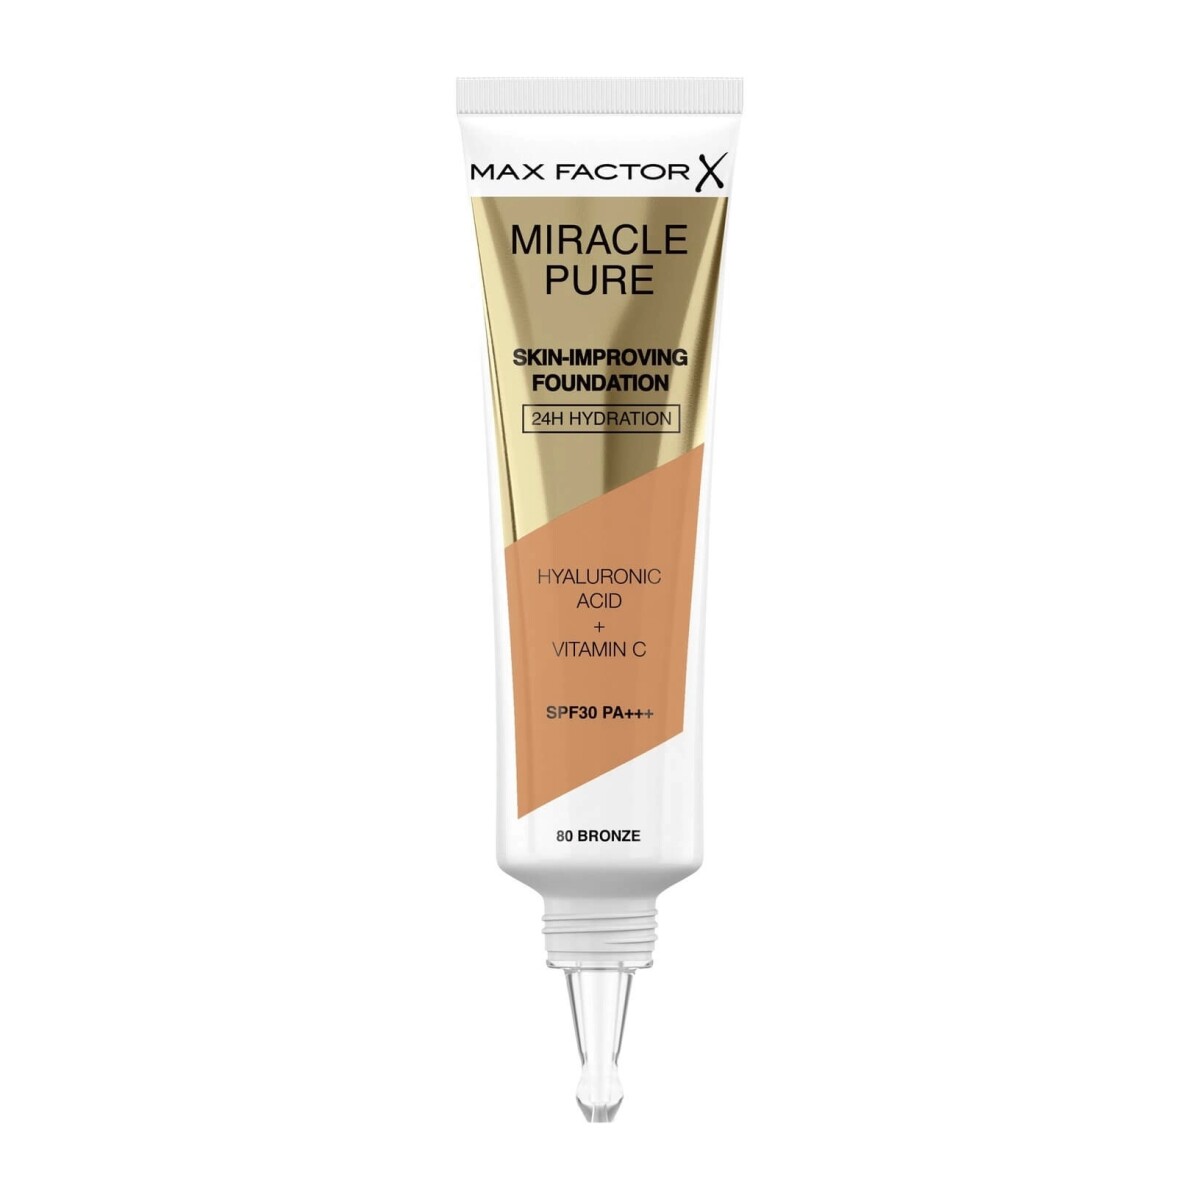 Mf Miracle Pure Foundation Bronze #80 